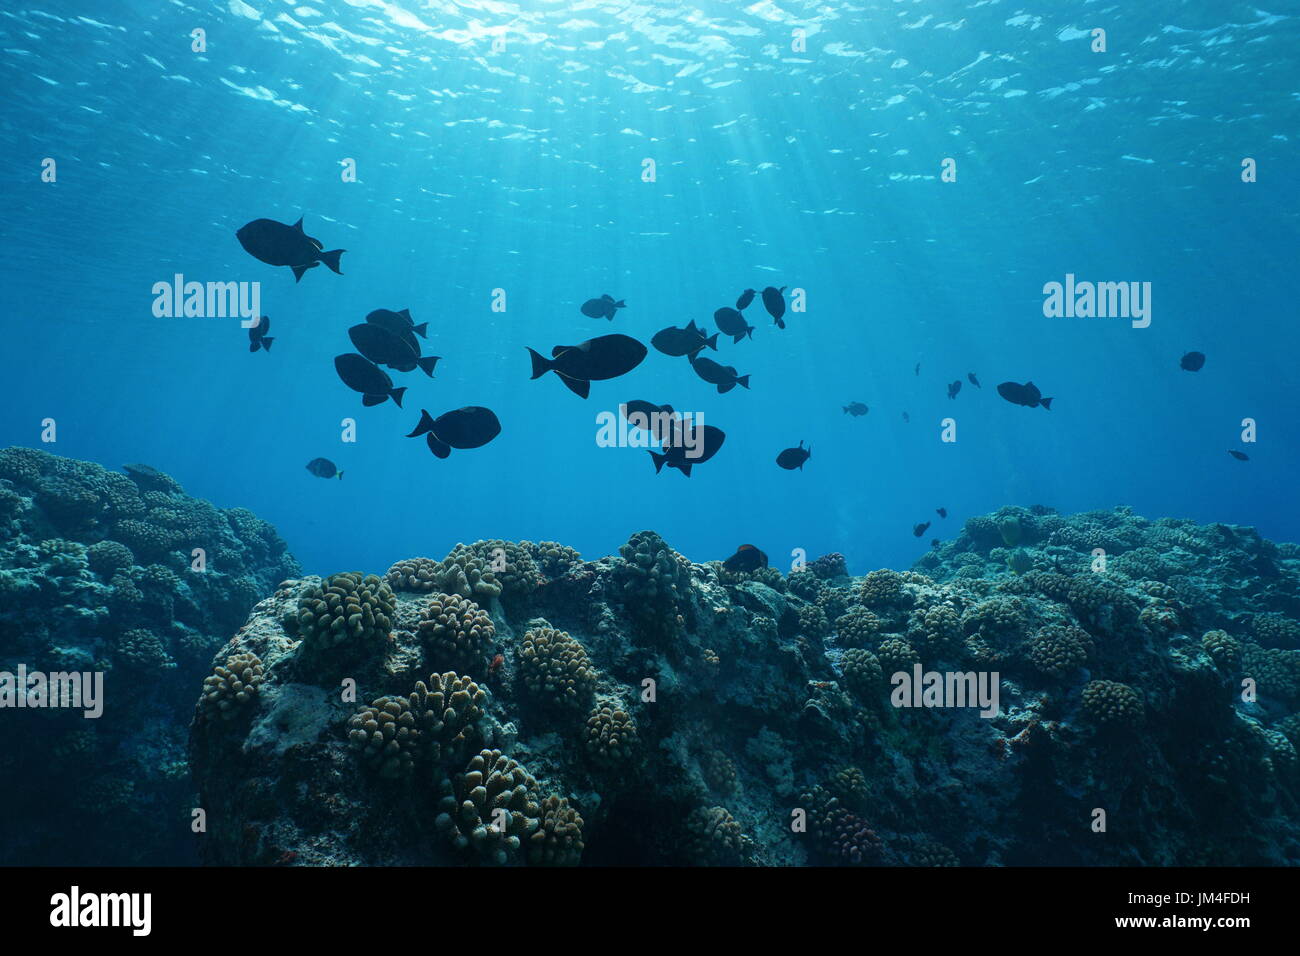 Coral reef with tropical fish and sunlight through sea surface, natural underwater scene in the Pacific ocean, Huahine island, French Polynesia Stock Photo